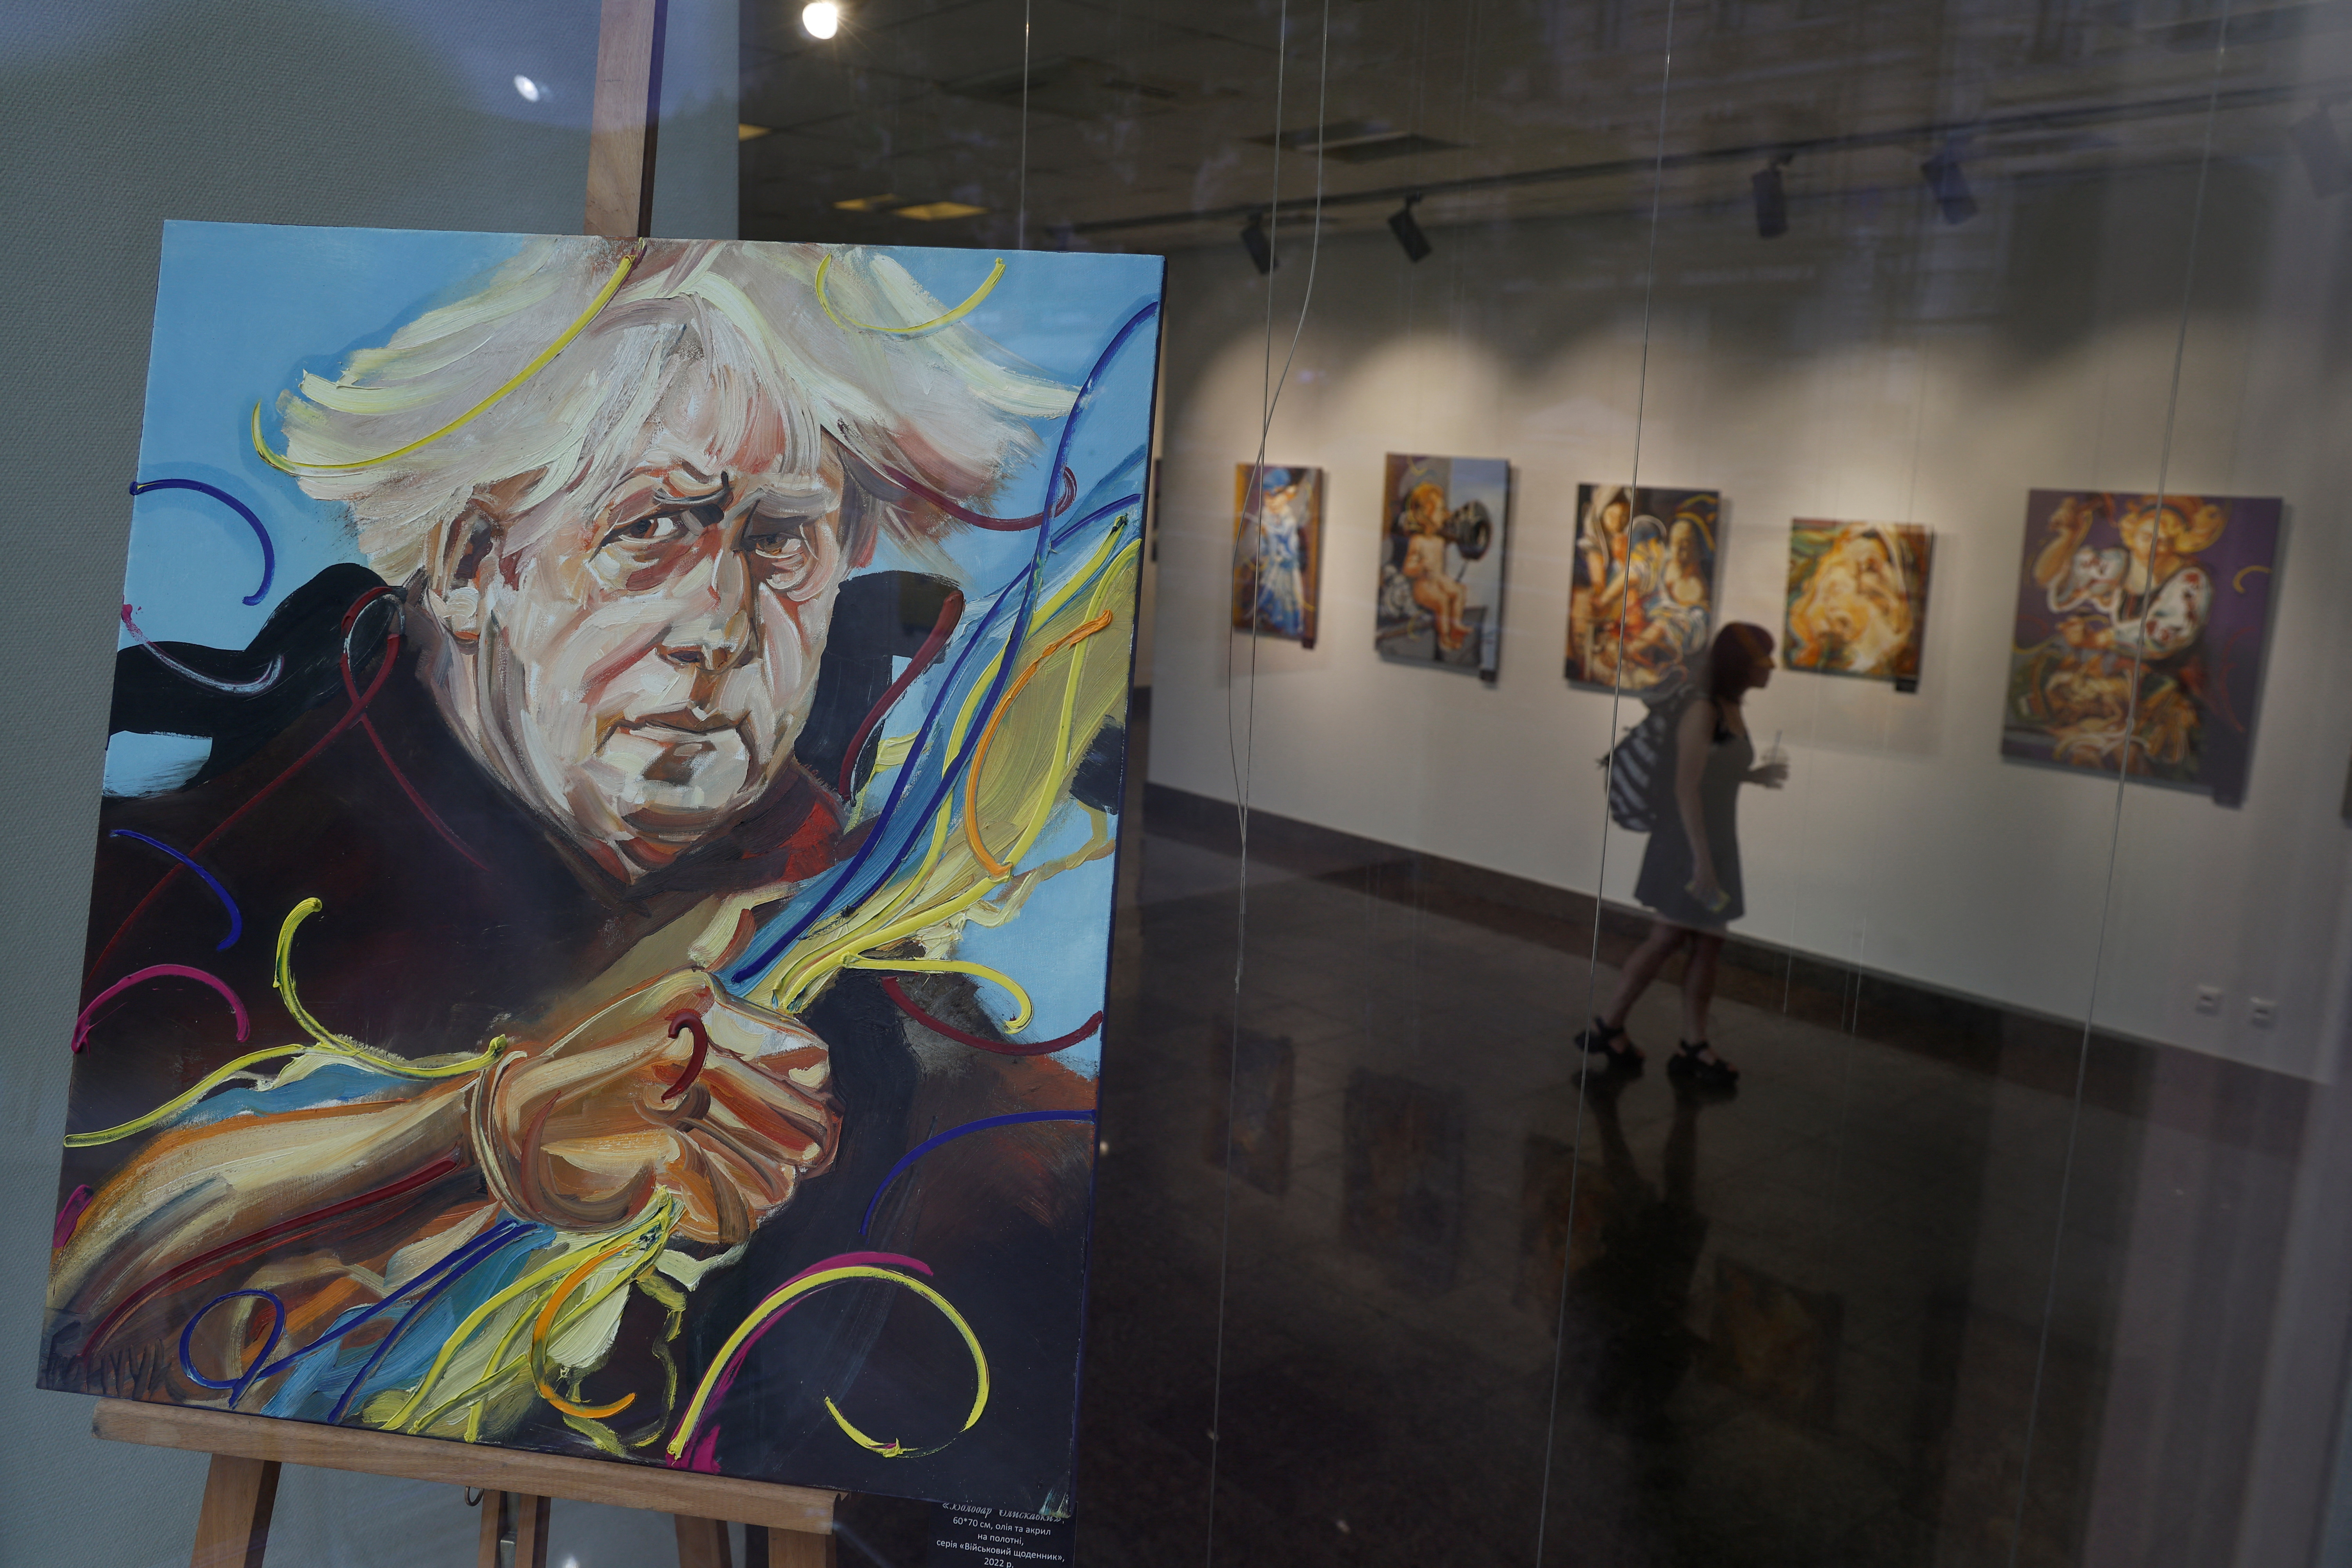 A portrait of British Prime Minister Boris Johnson is seen at a gallery in Kyiv